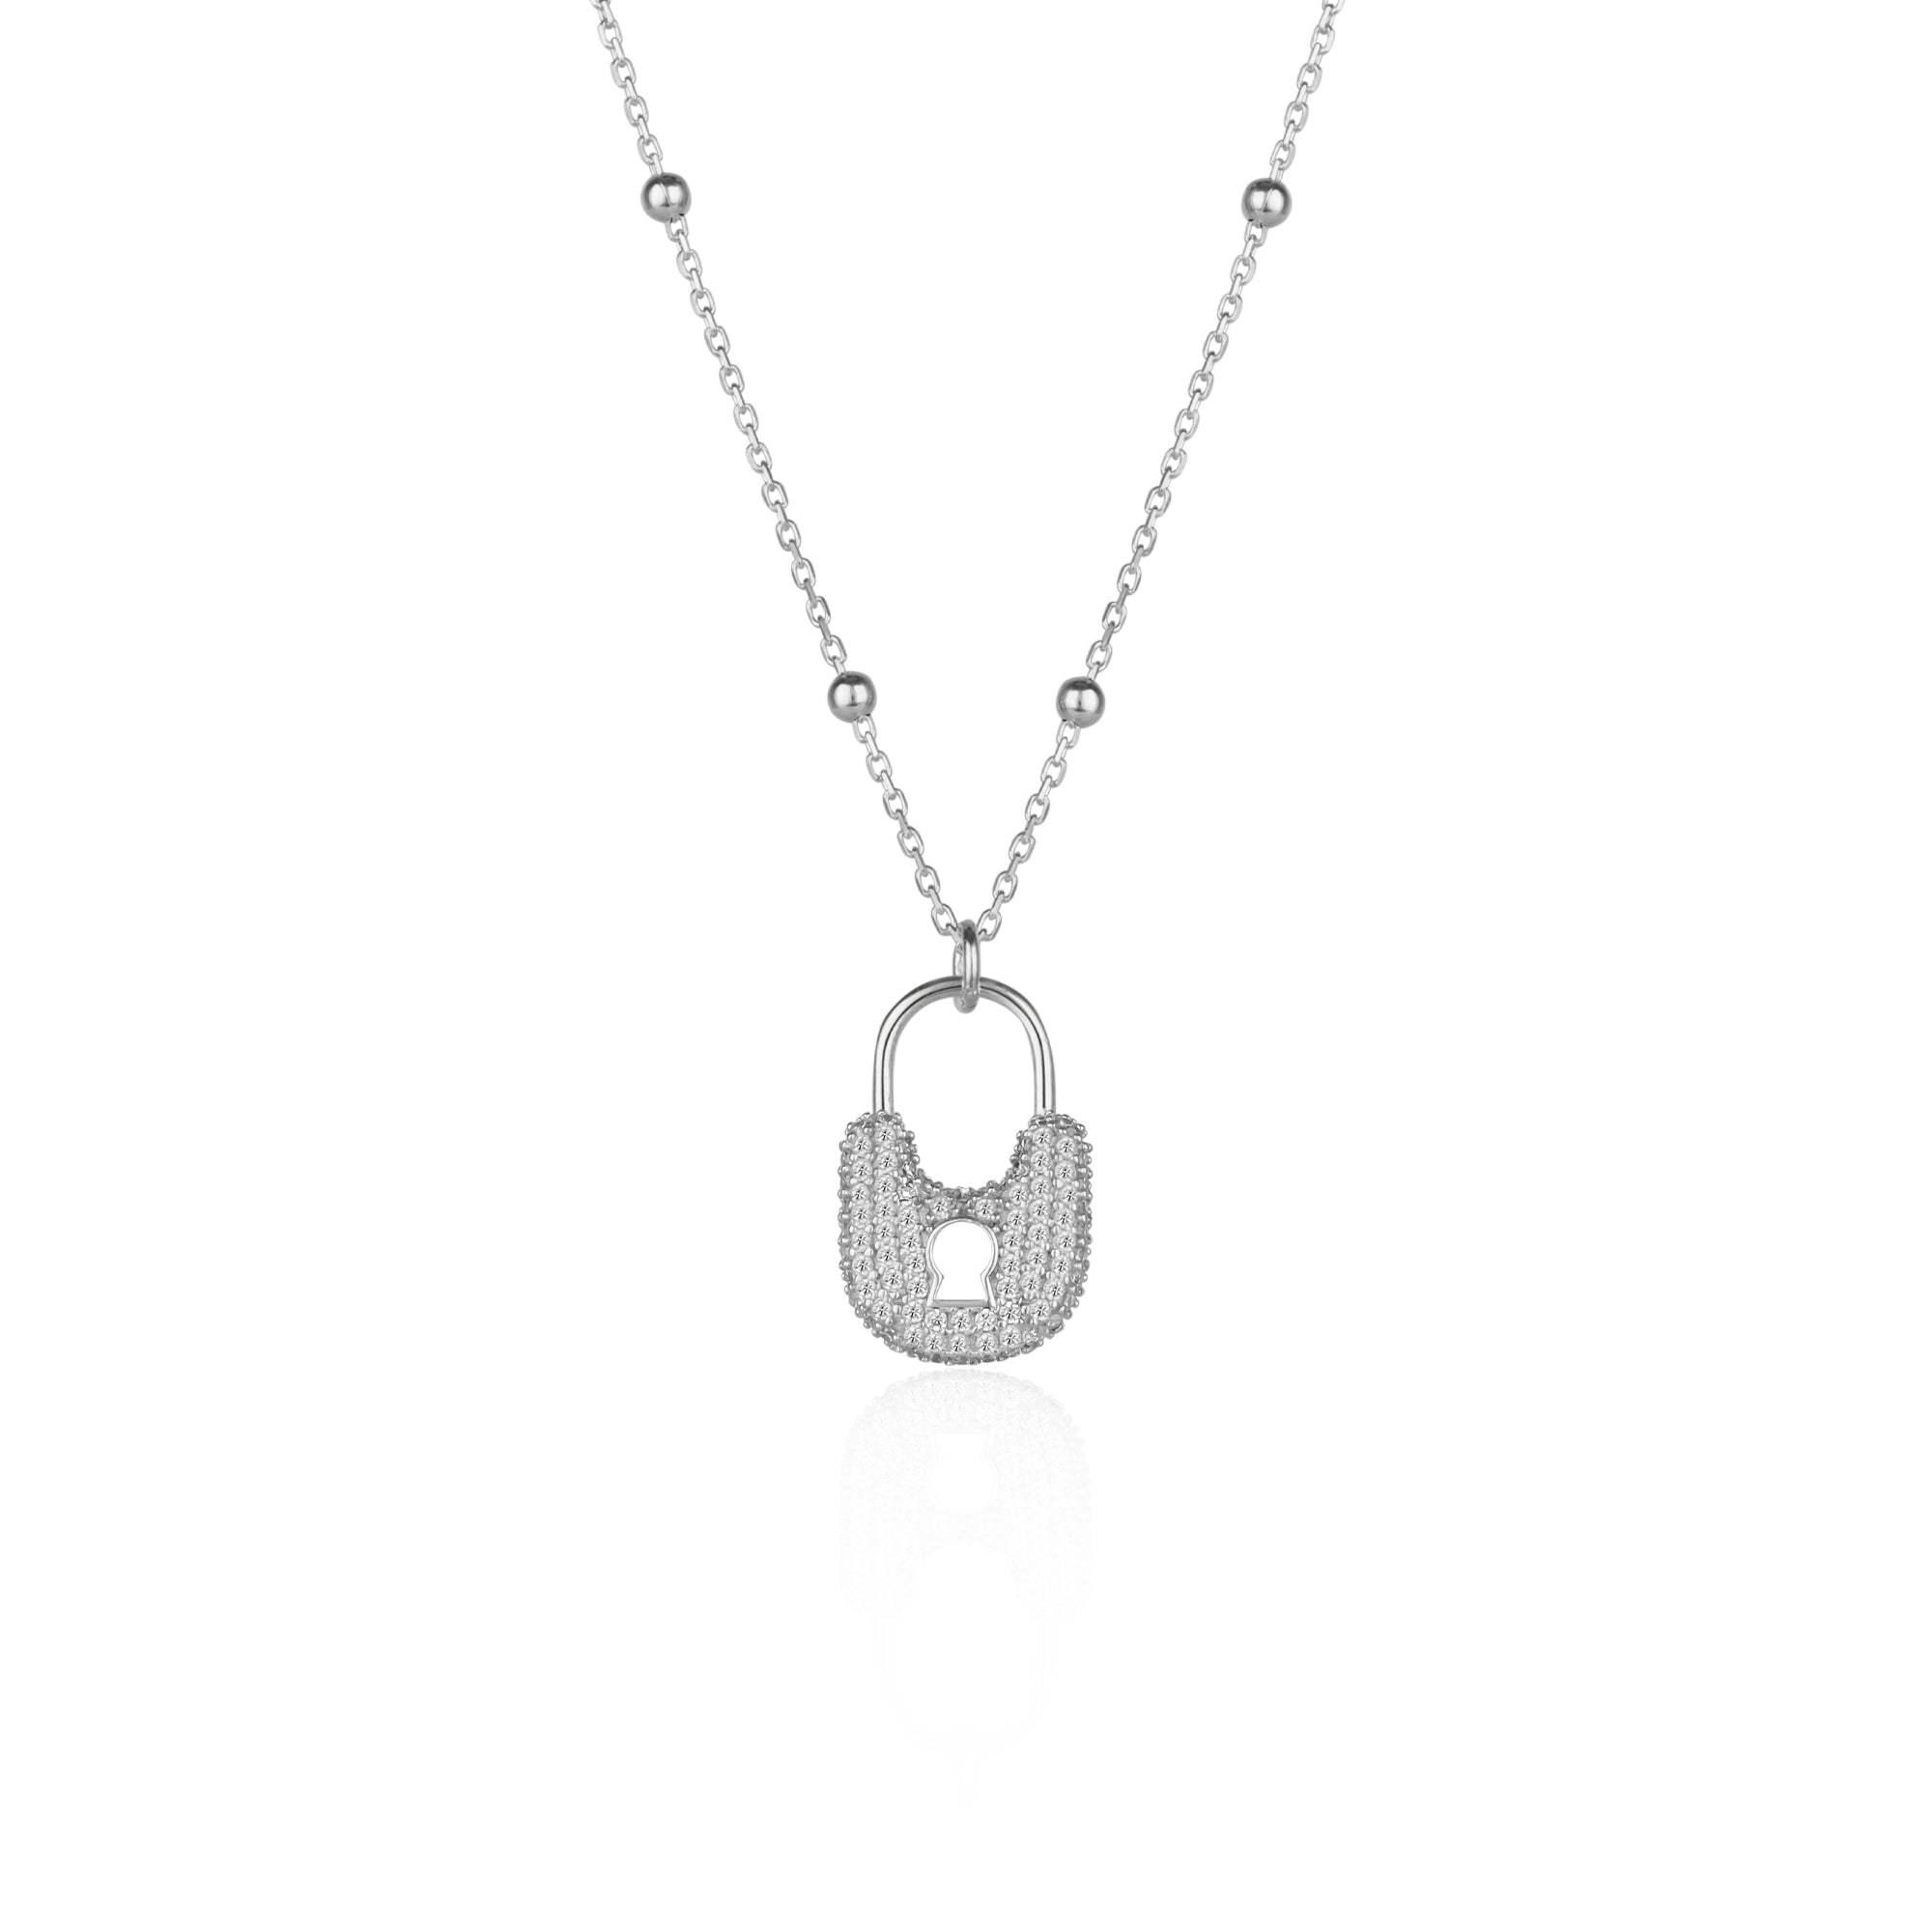 Lock Pendant Necklace With Beaded Chain Sterling Silver